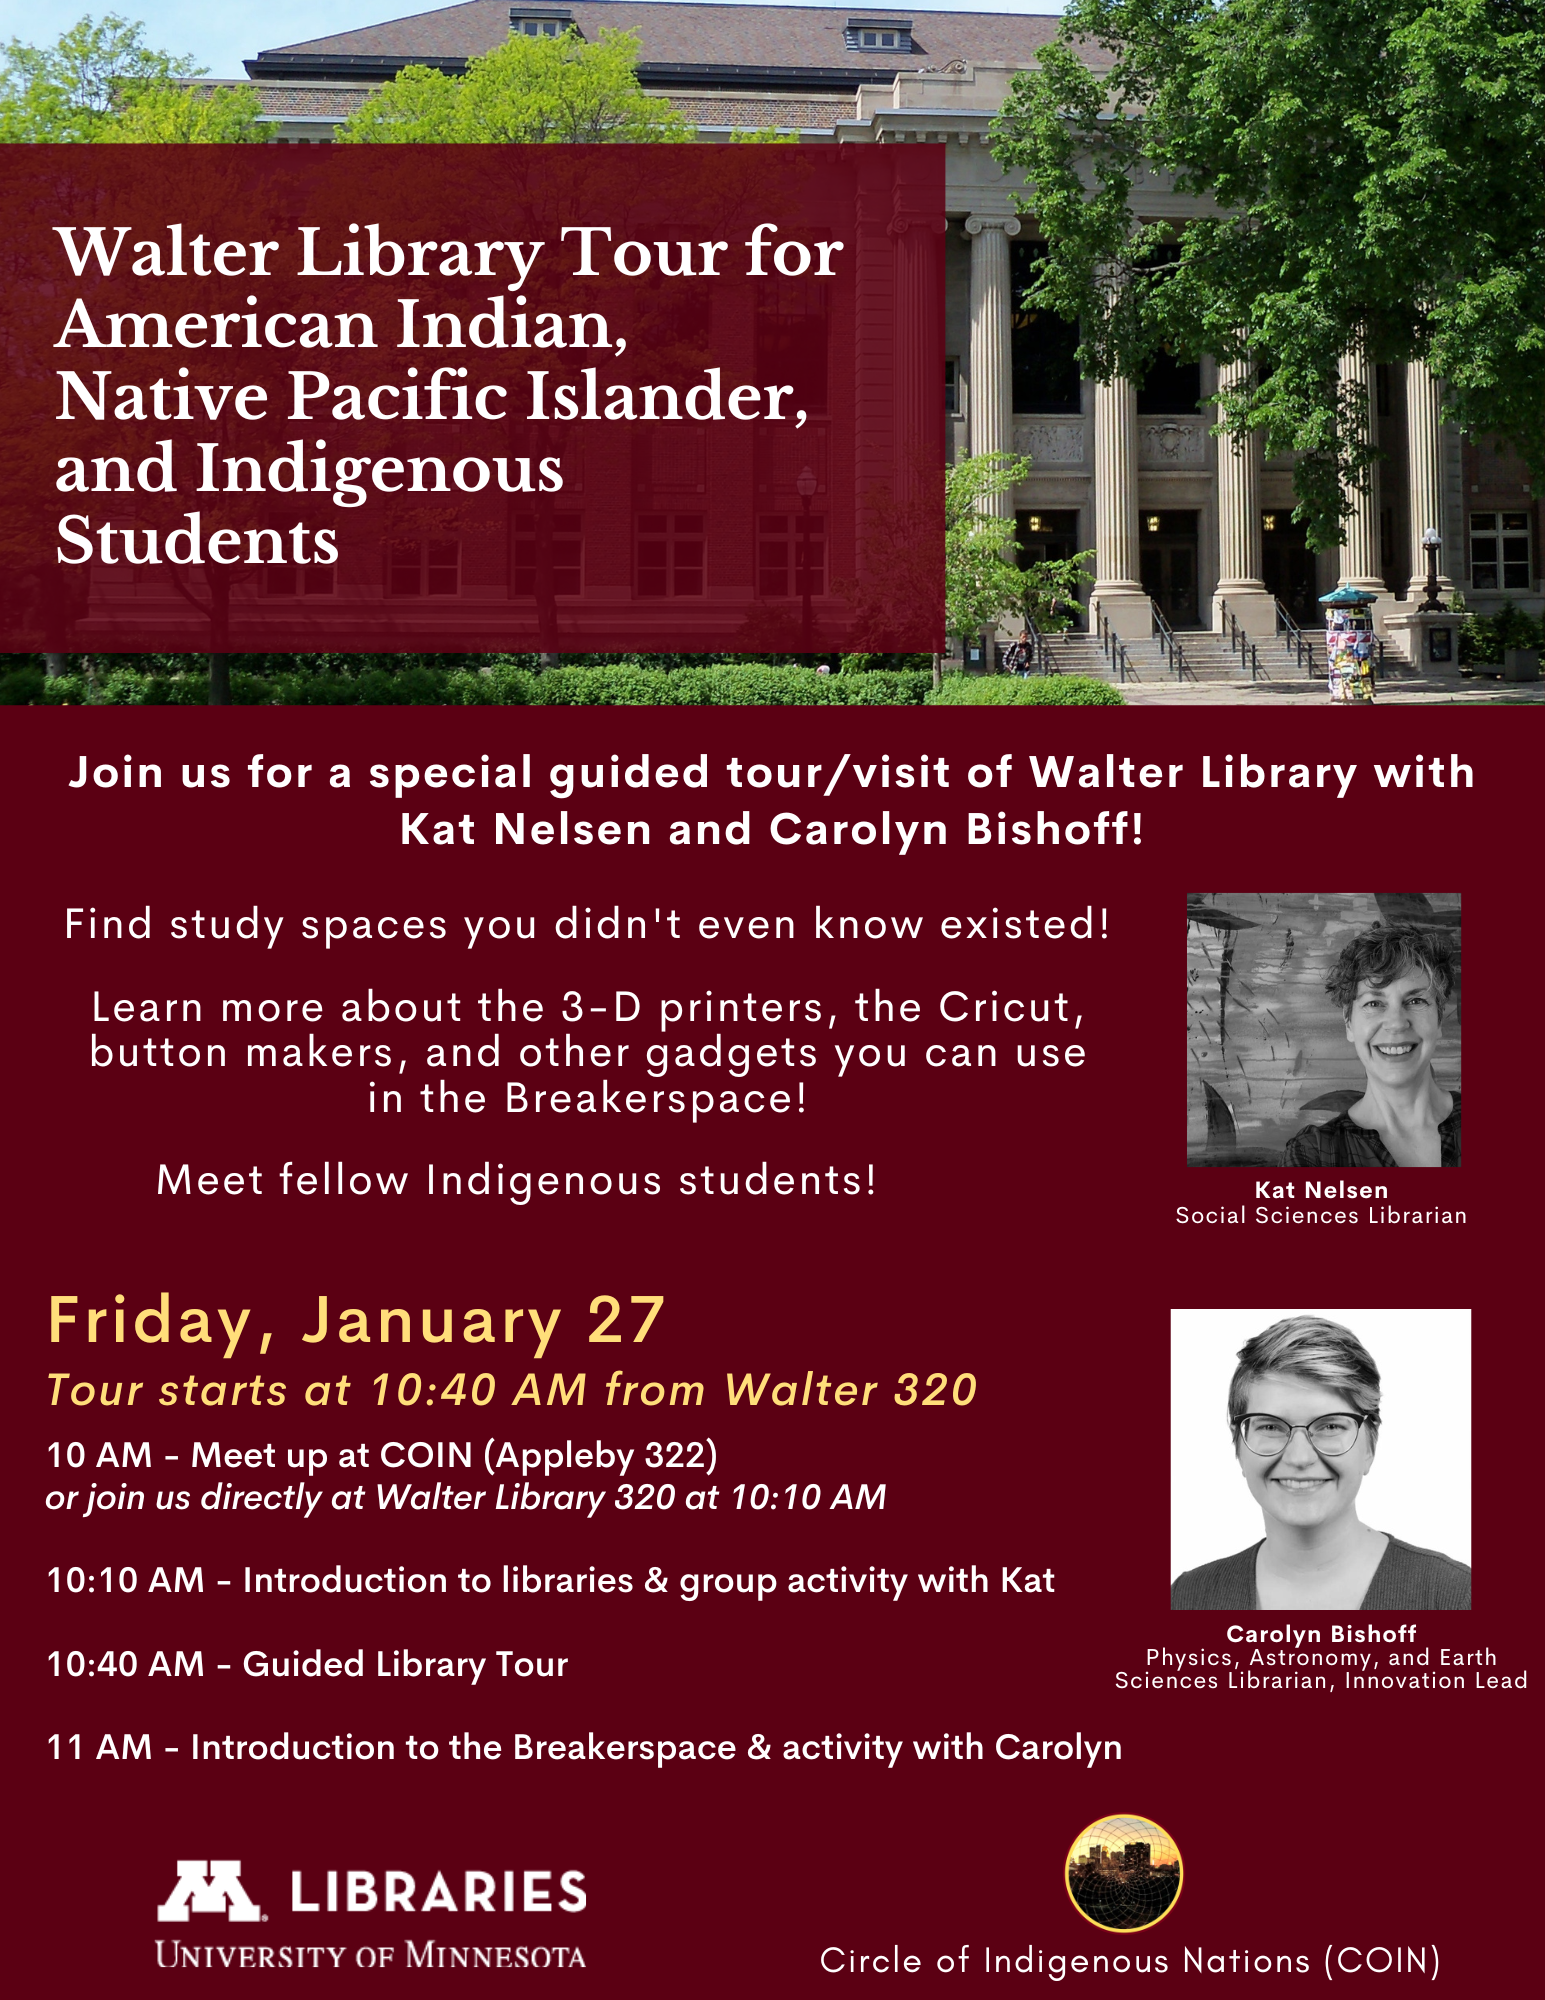 promotional flyer for a guided tour of Walter Library with Kat Nelsen from the UMN Libraries